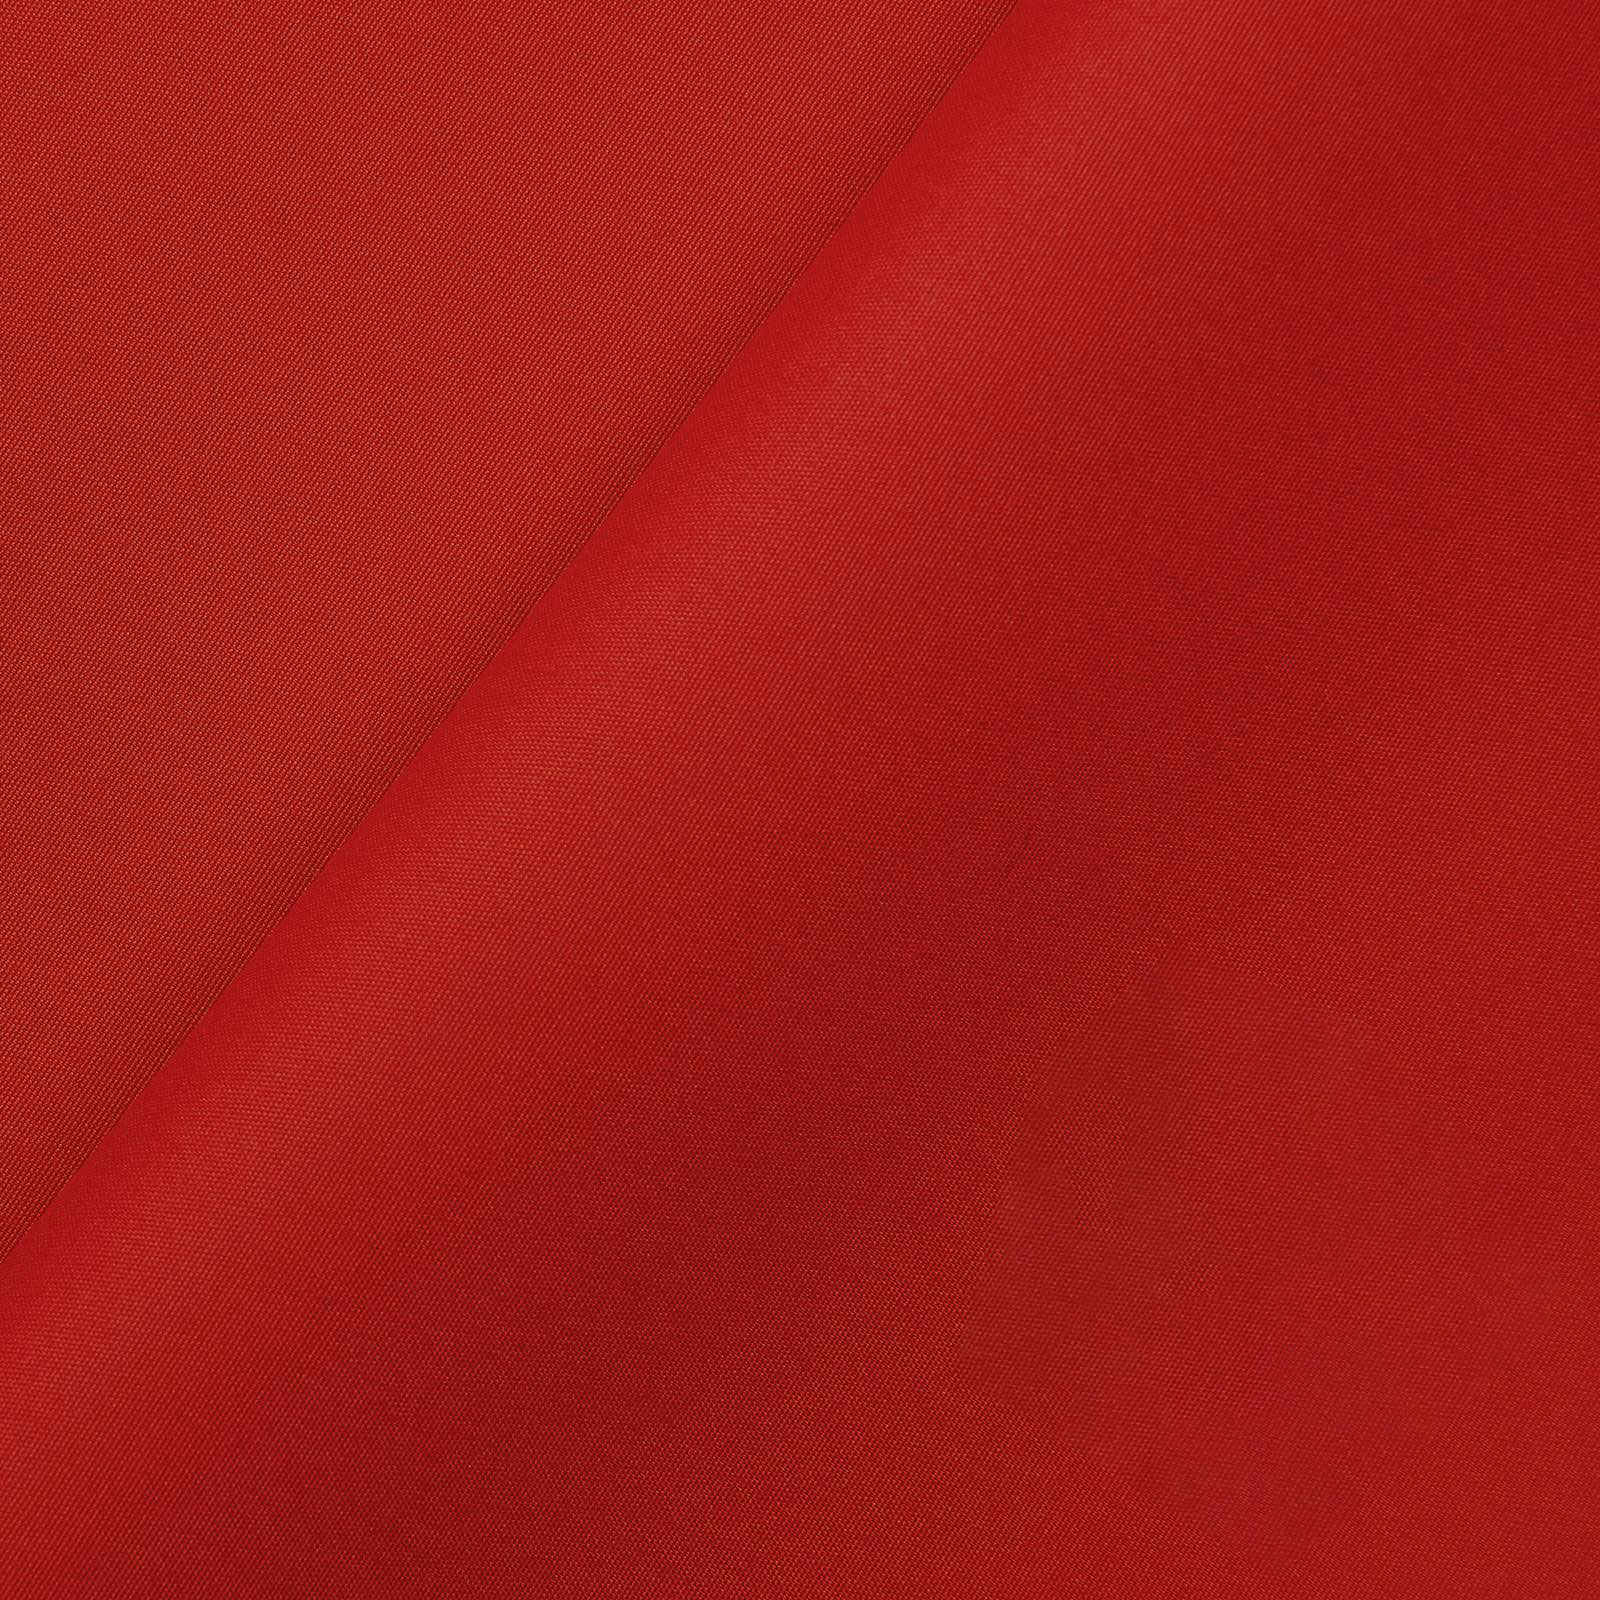 Peach - multifunctional fabric with finish (red)